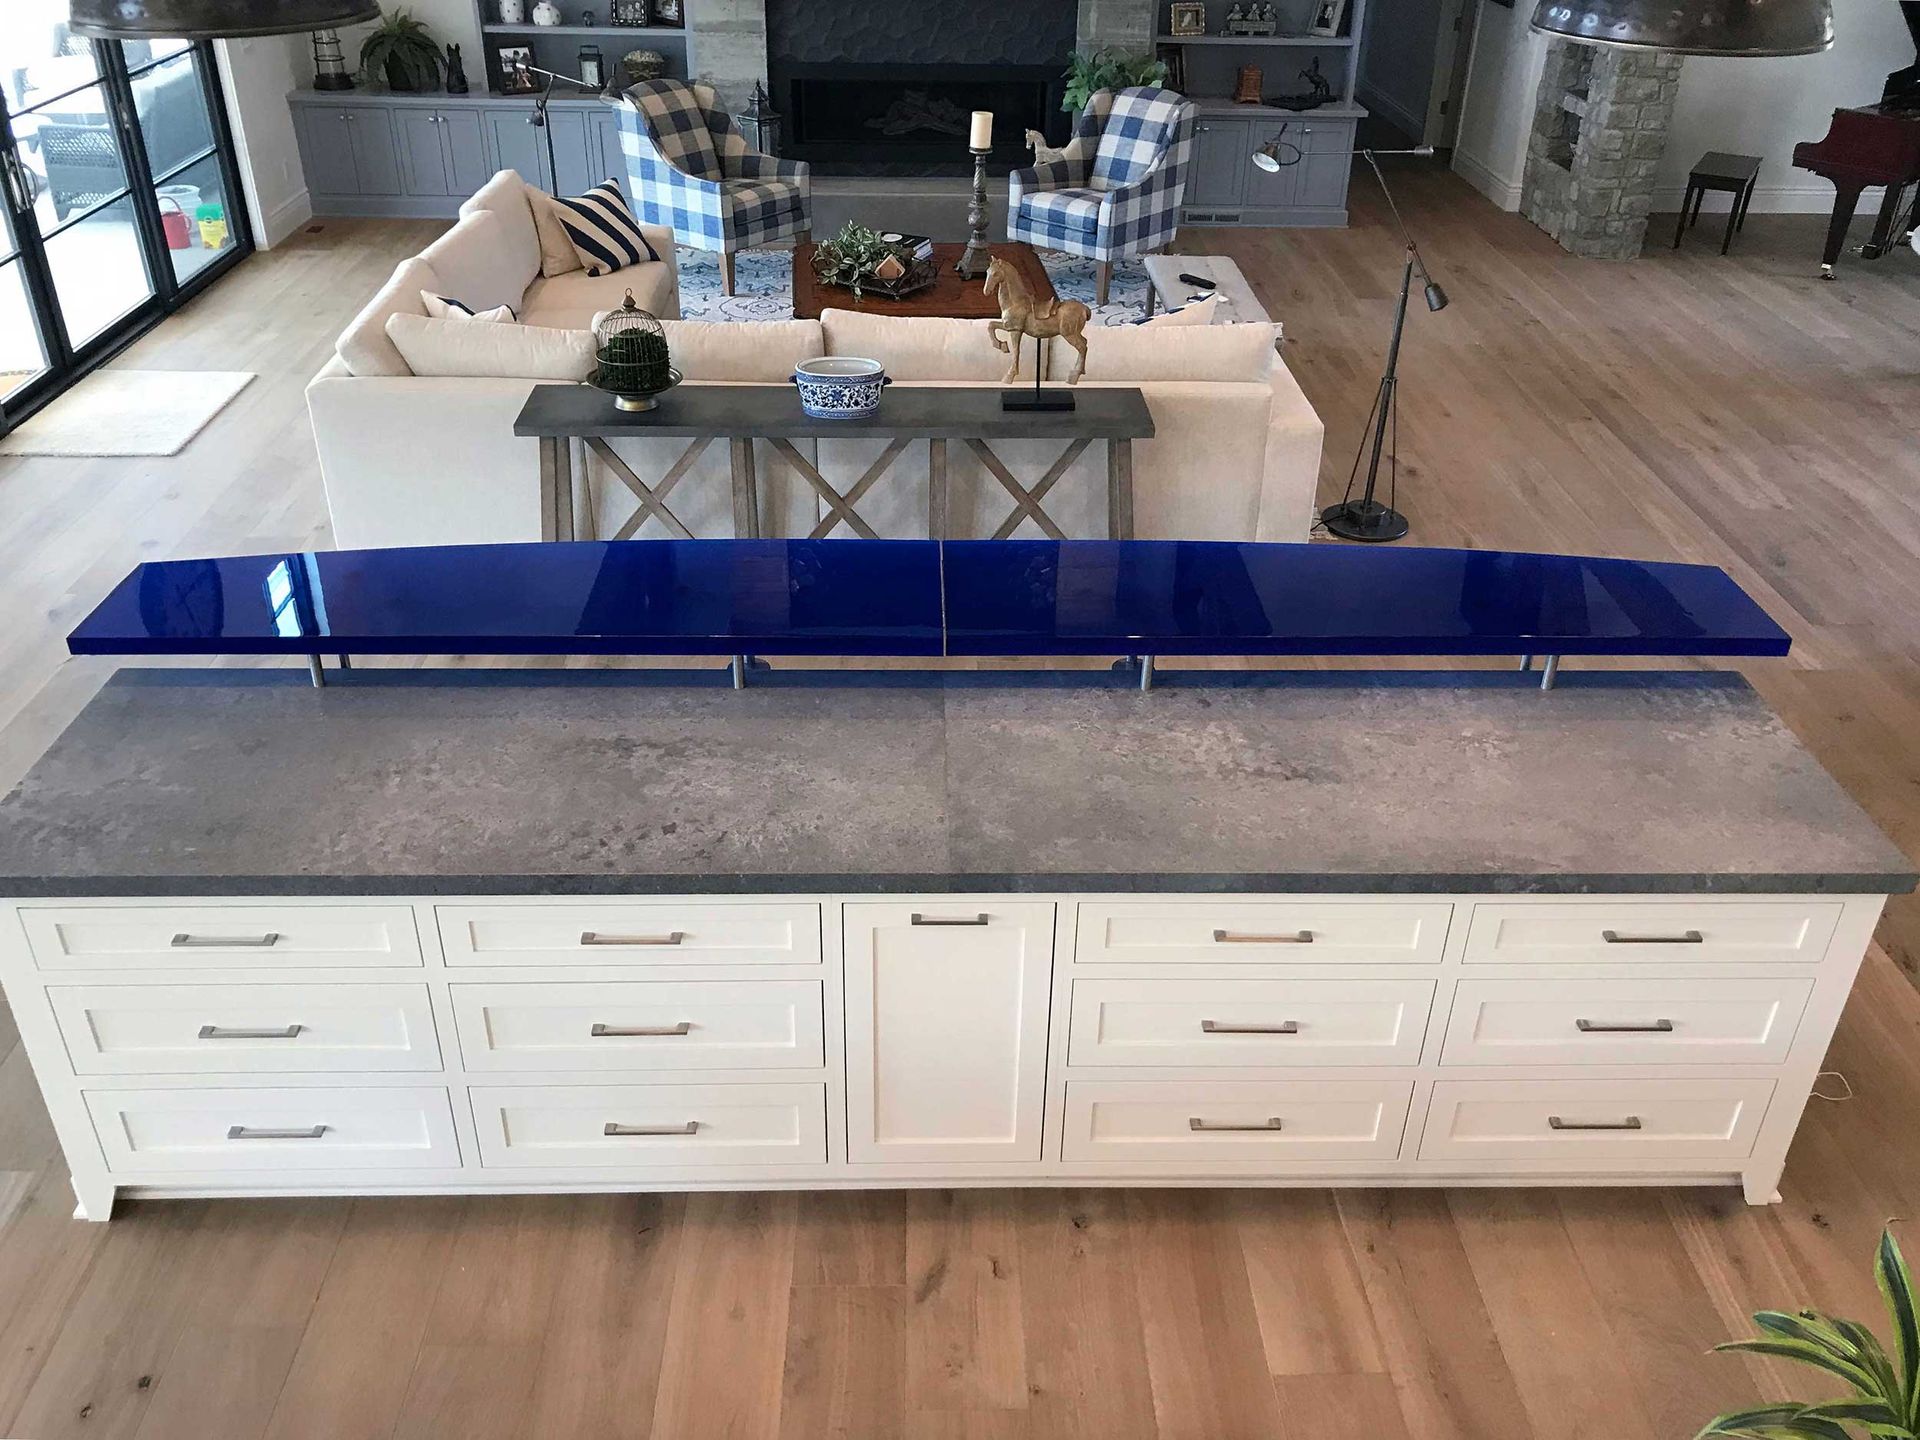 A countertop using TCG's TRUE Colors glass.